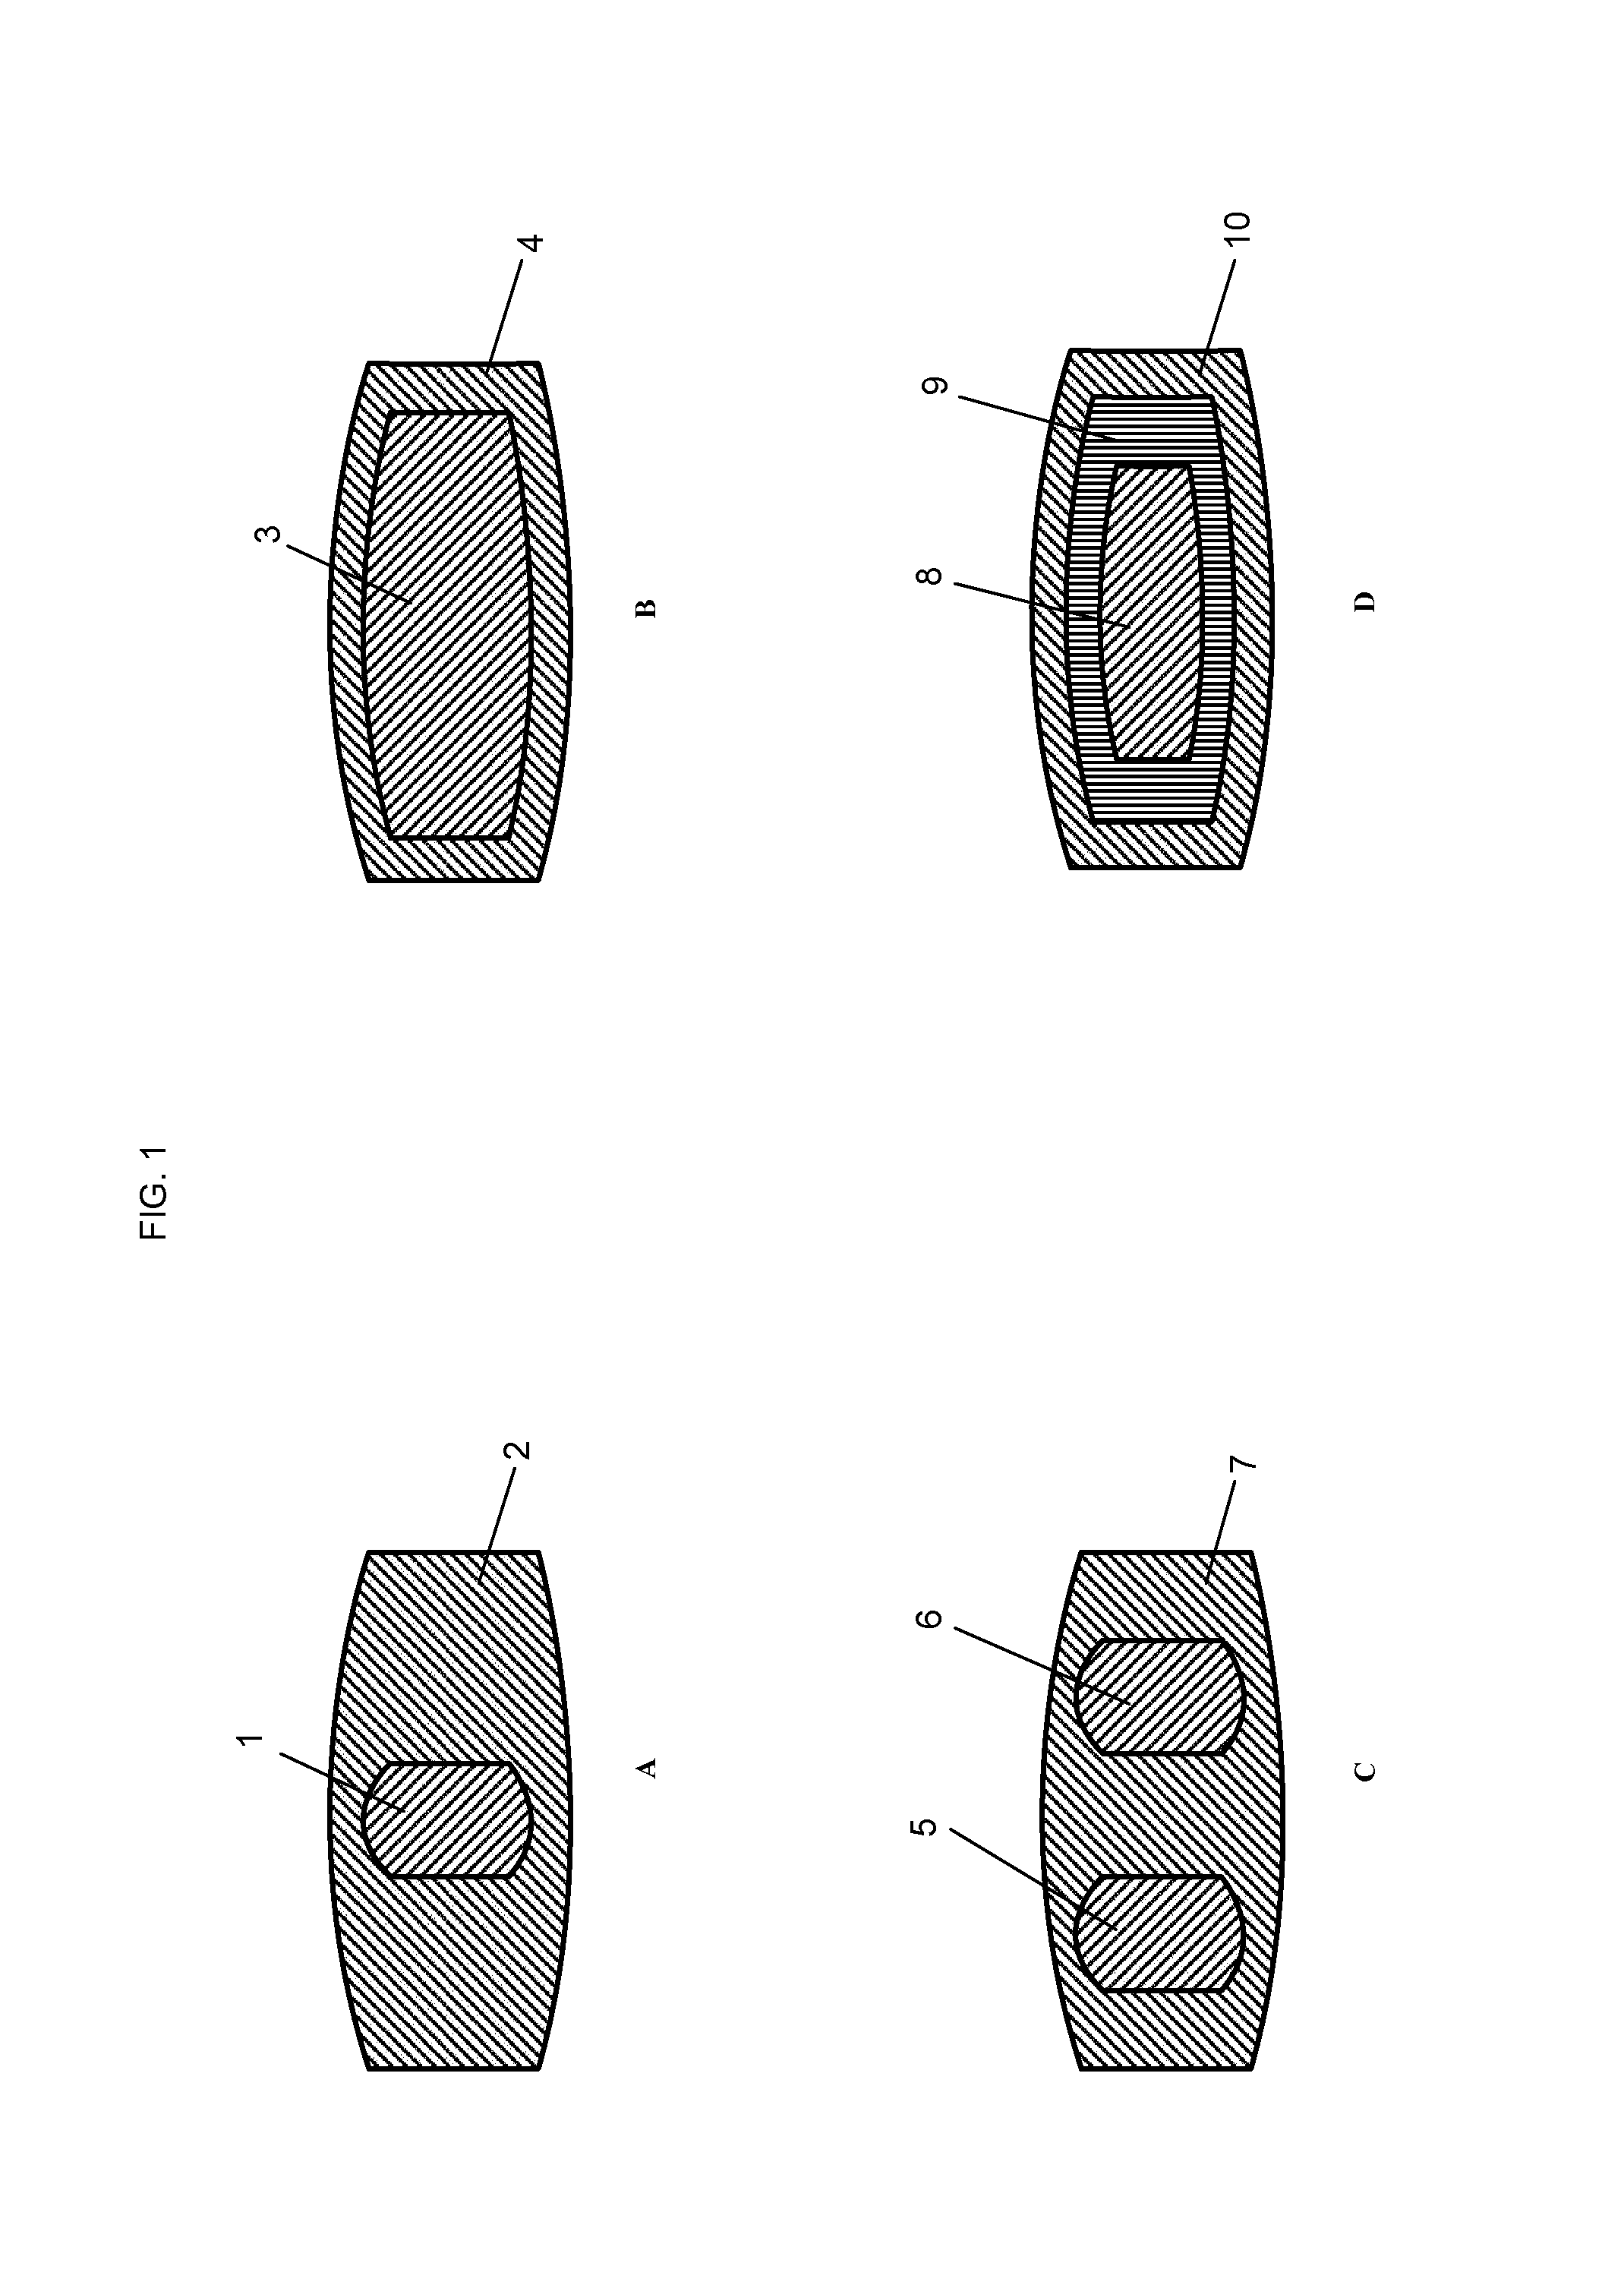 Tamper-resistant dosage form containing one or more particles